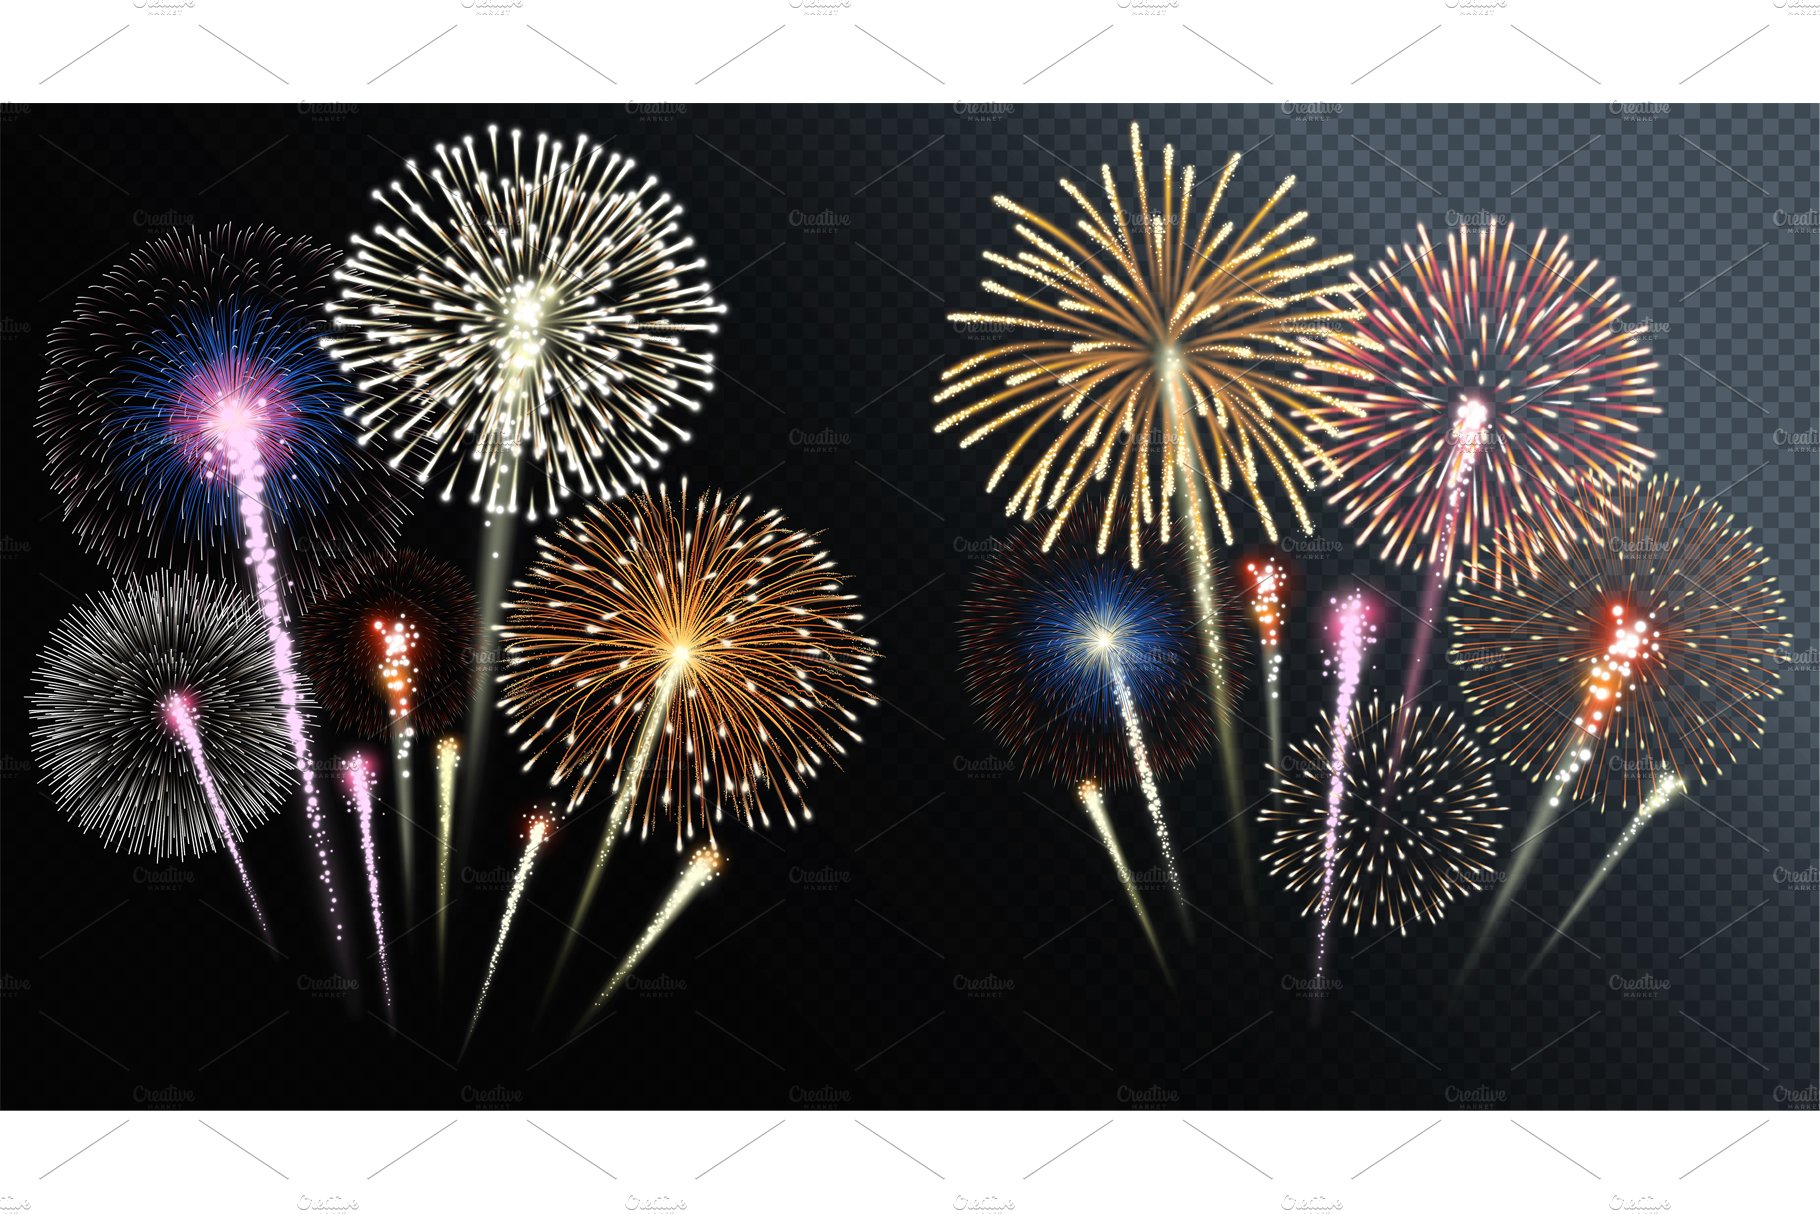 Two groups of isolated fireworks cover image.